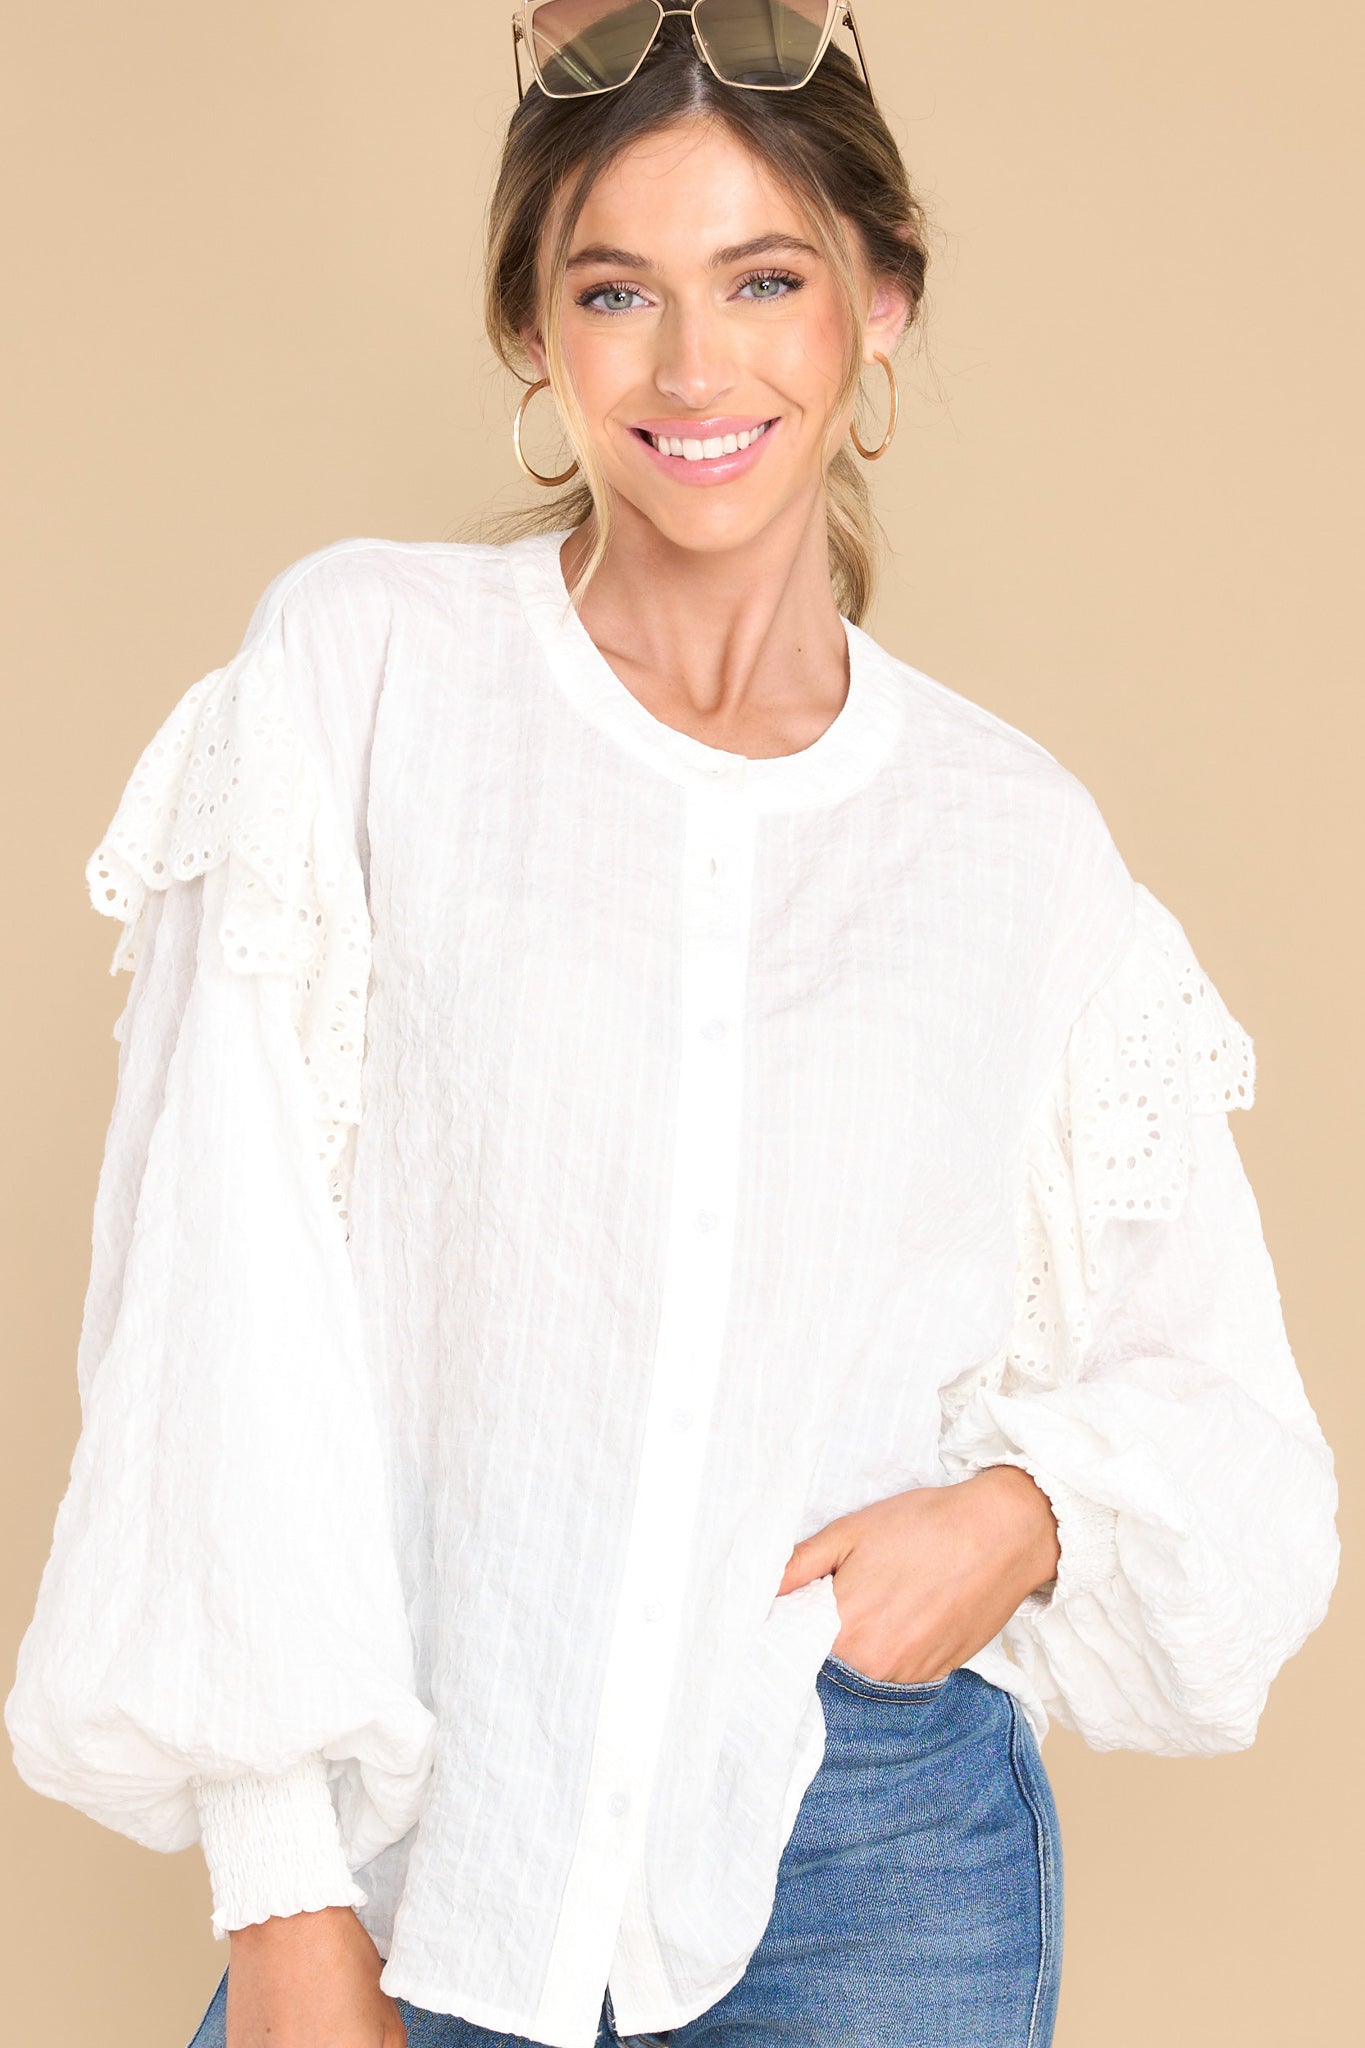 Front view of this top that features a high-neckline, buttons down the front, ruffle detail along the shoulders, puff sleeves with smock detailing at the cuffs, and a relaxed fit.